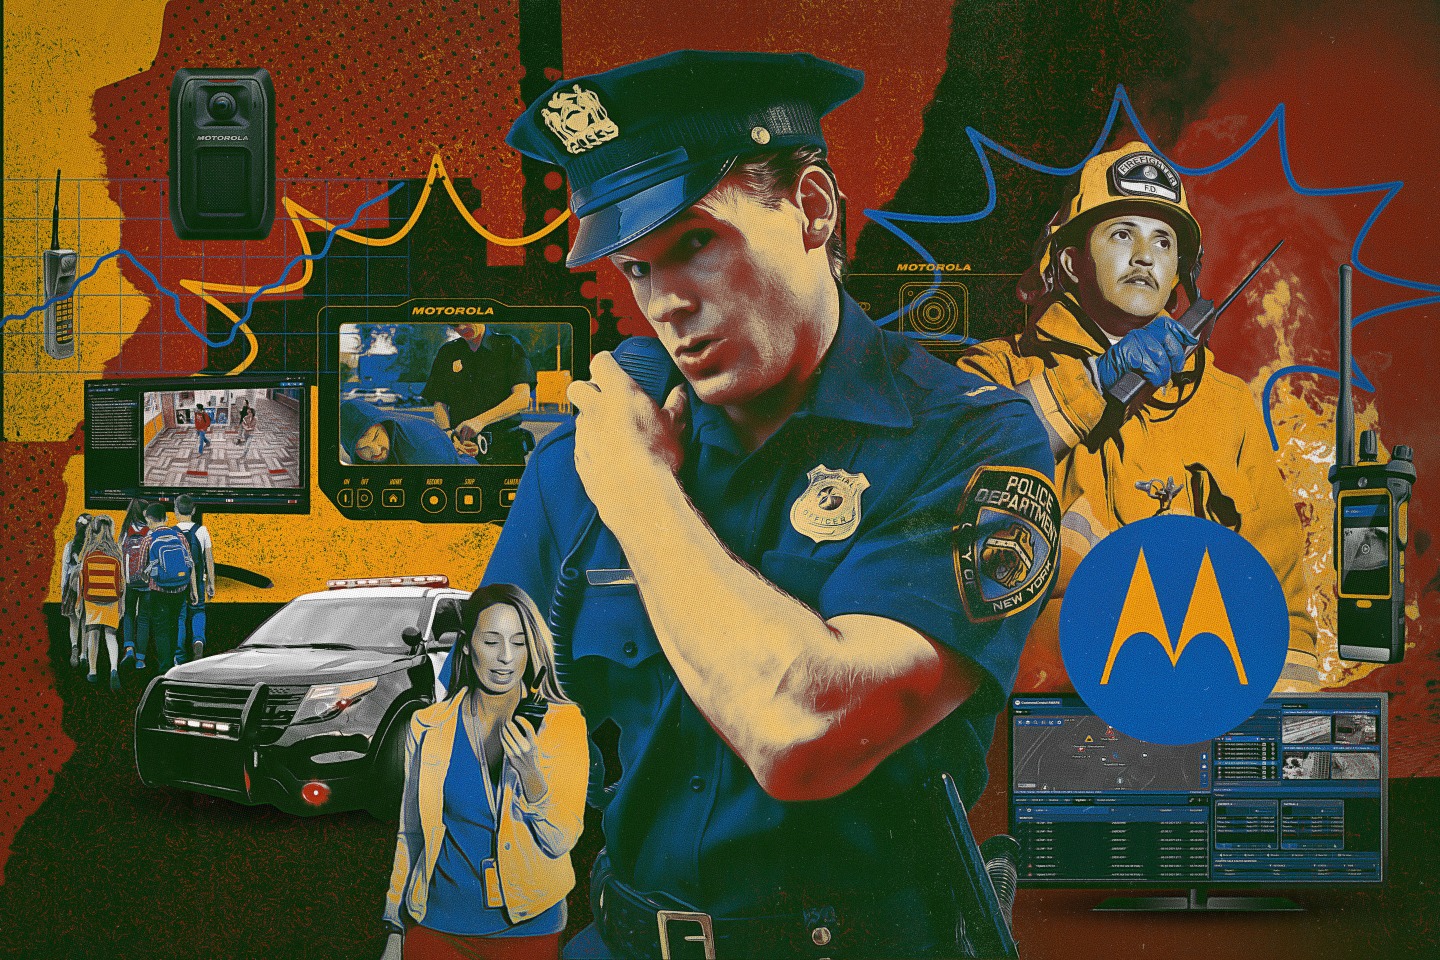 An illustration of police officers, firefighters, and school officials using Motorola equipment.